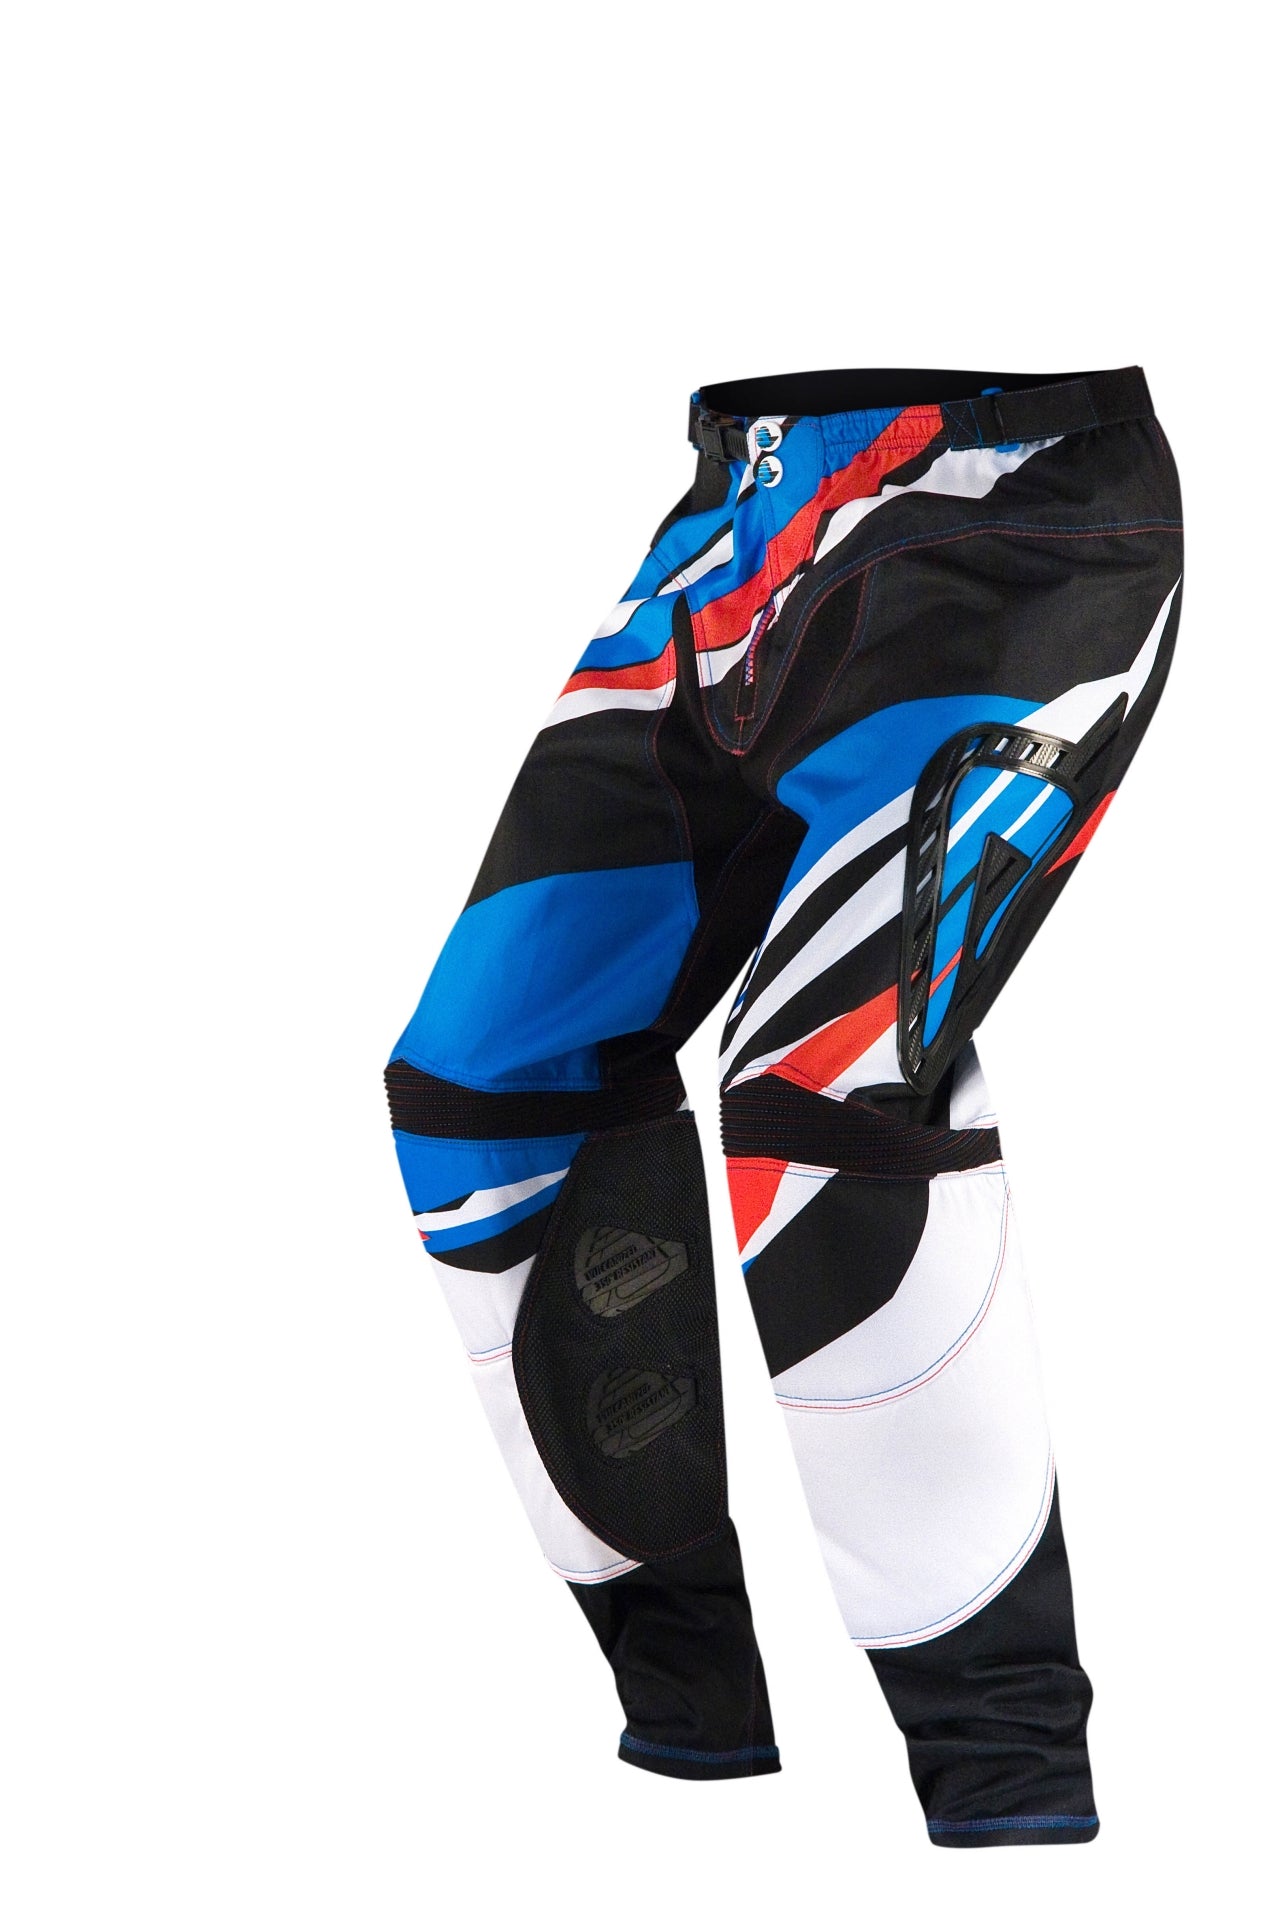 **X-Gear Pants BLUE/RED NOW £36.00